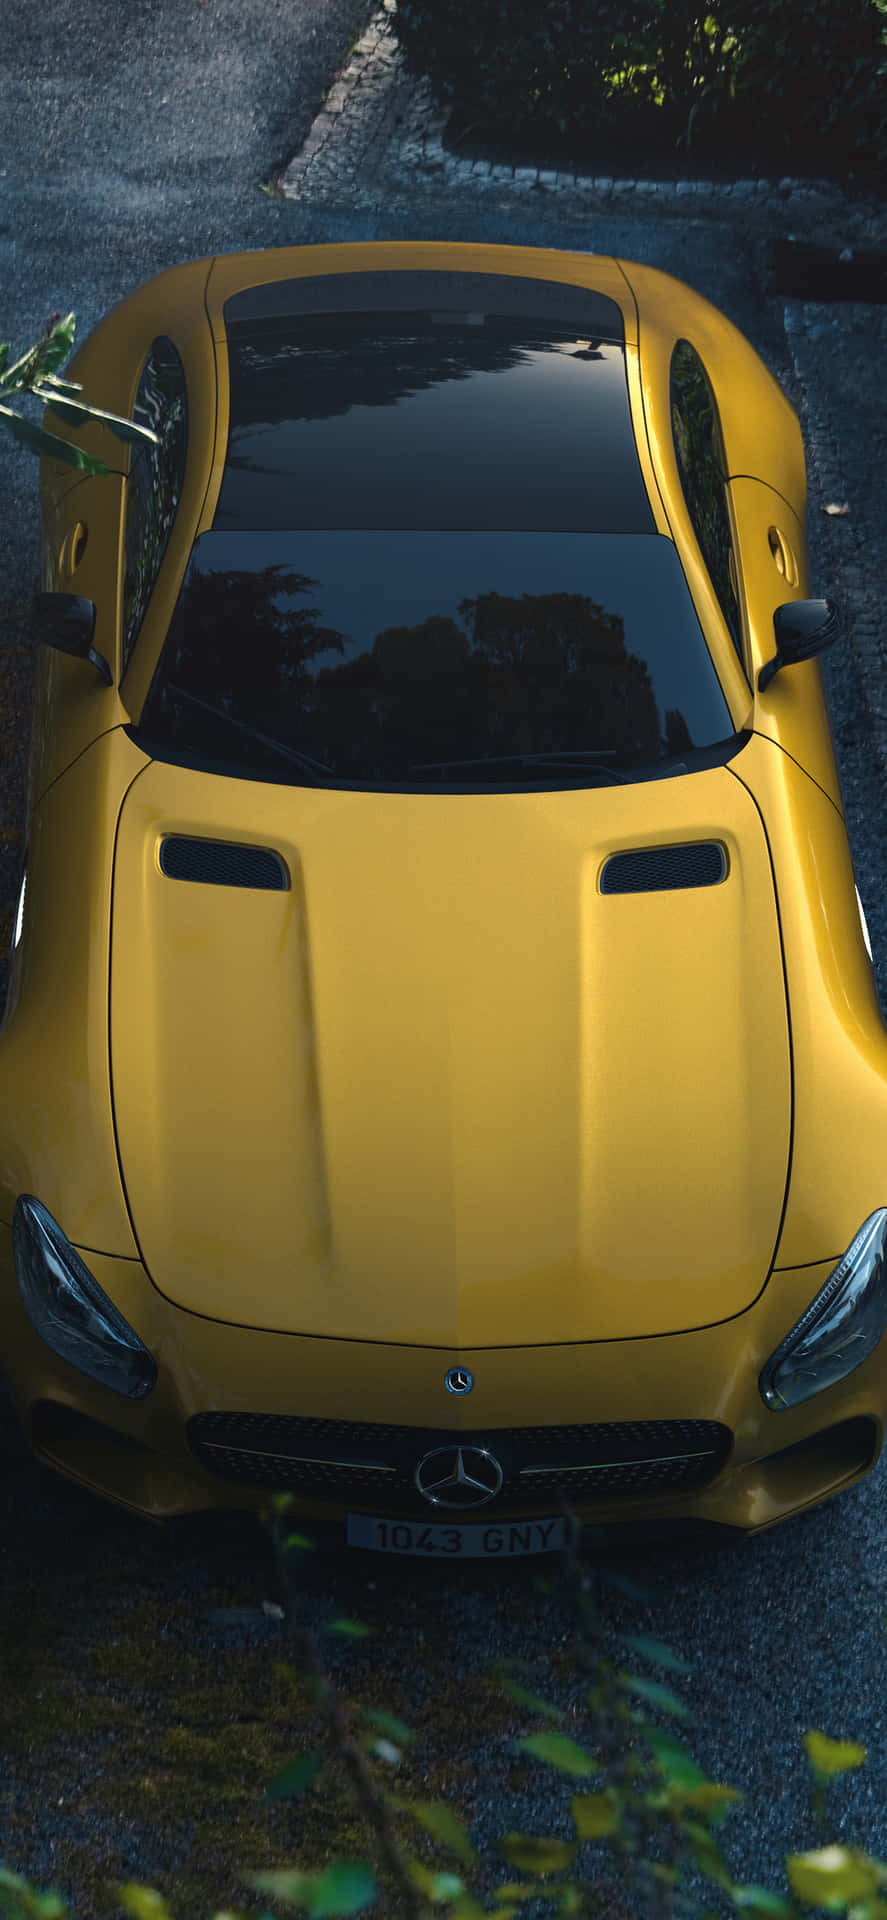 Iphone X Amg Gt-r Background Yellow AMG GT